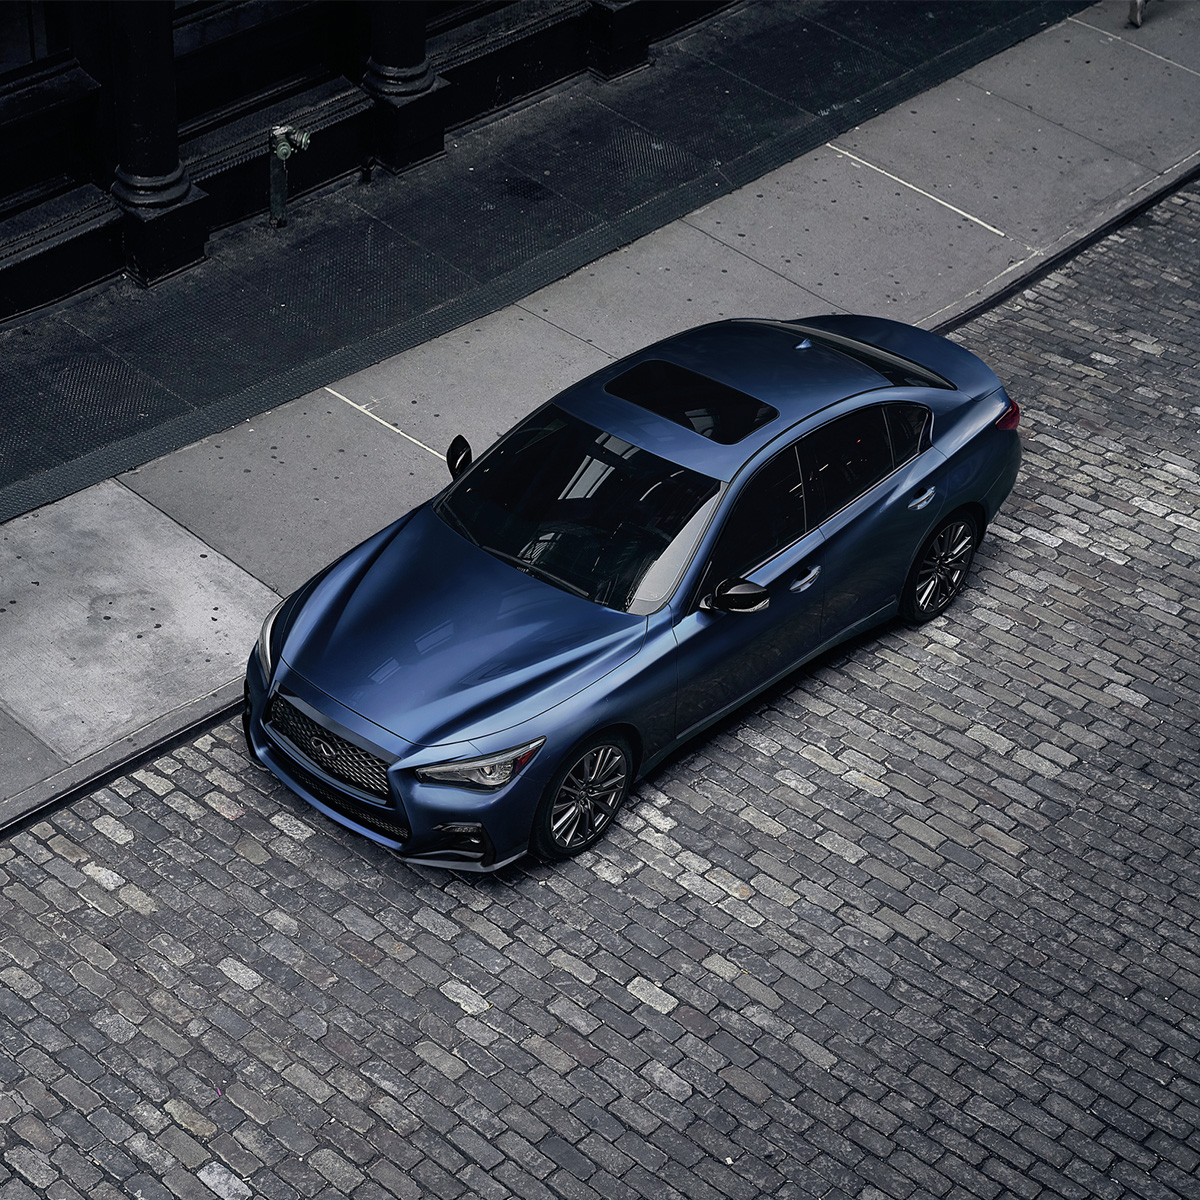 2022 INFINITI Q50 parked in the city